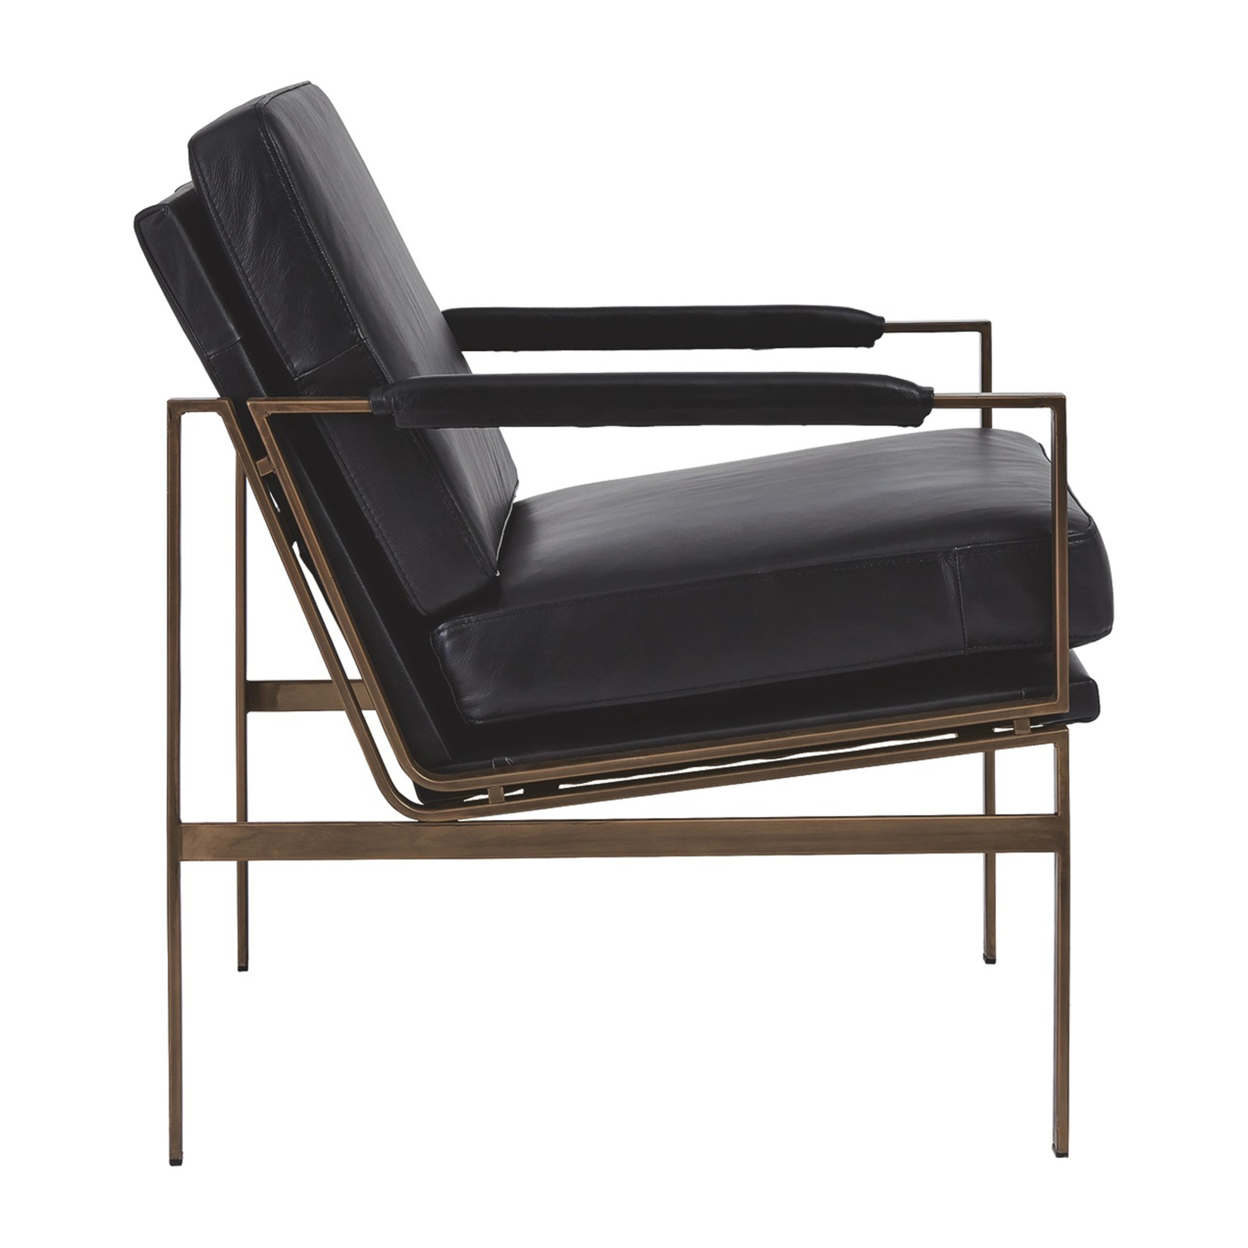 Metal Frame Accent Chair With Leatherette Seat And Back, Black And Bronze- Saltoro Sherpi